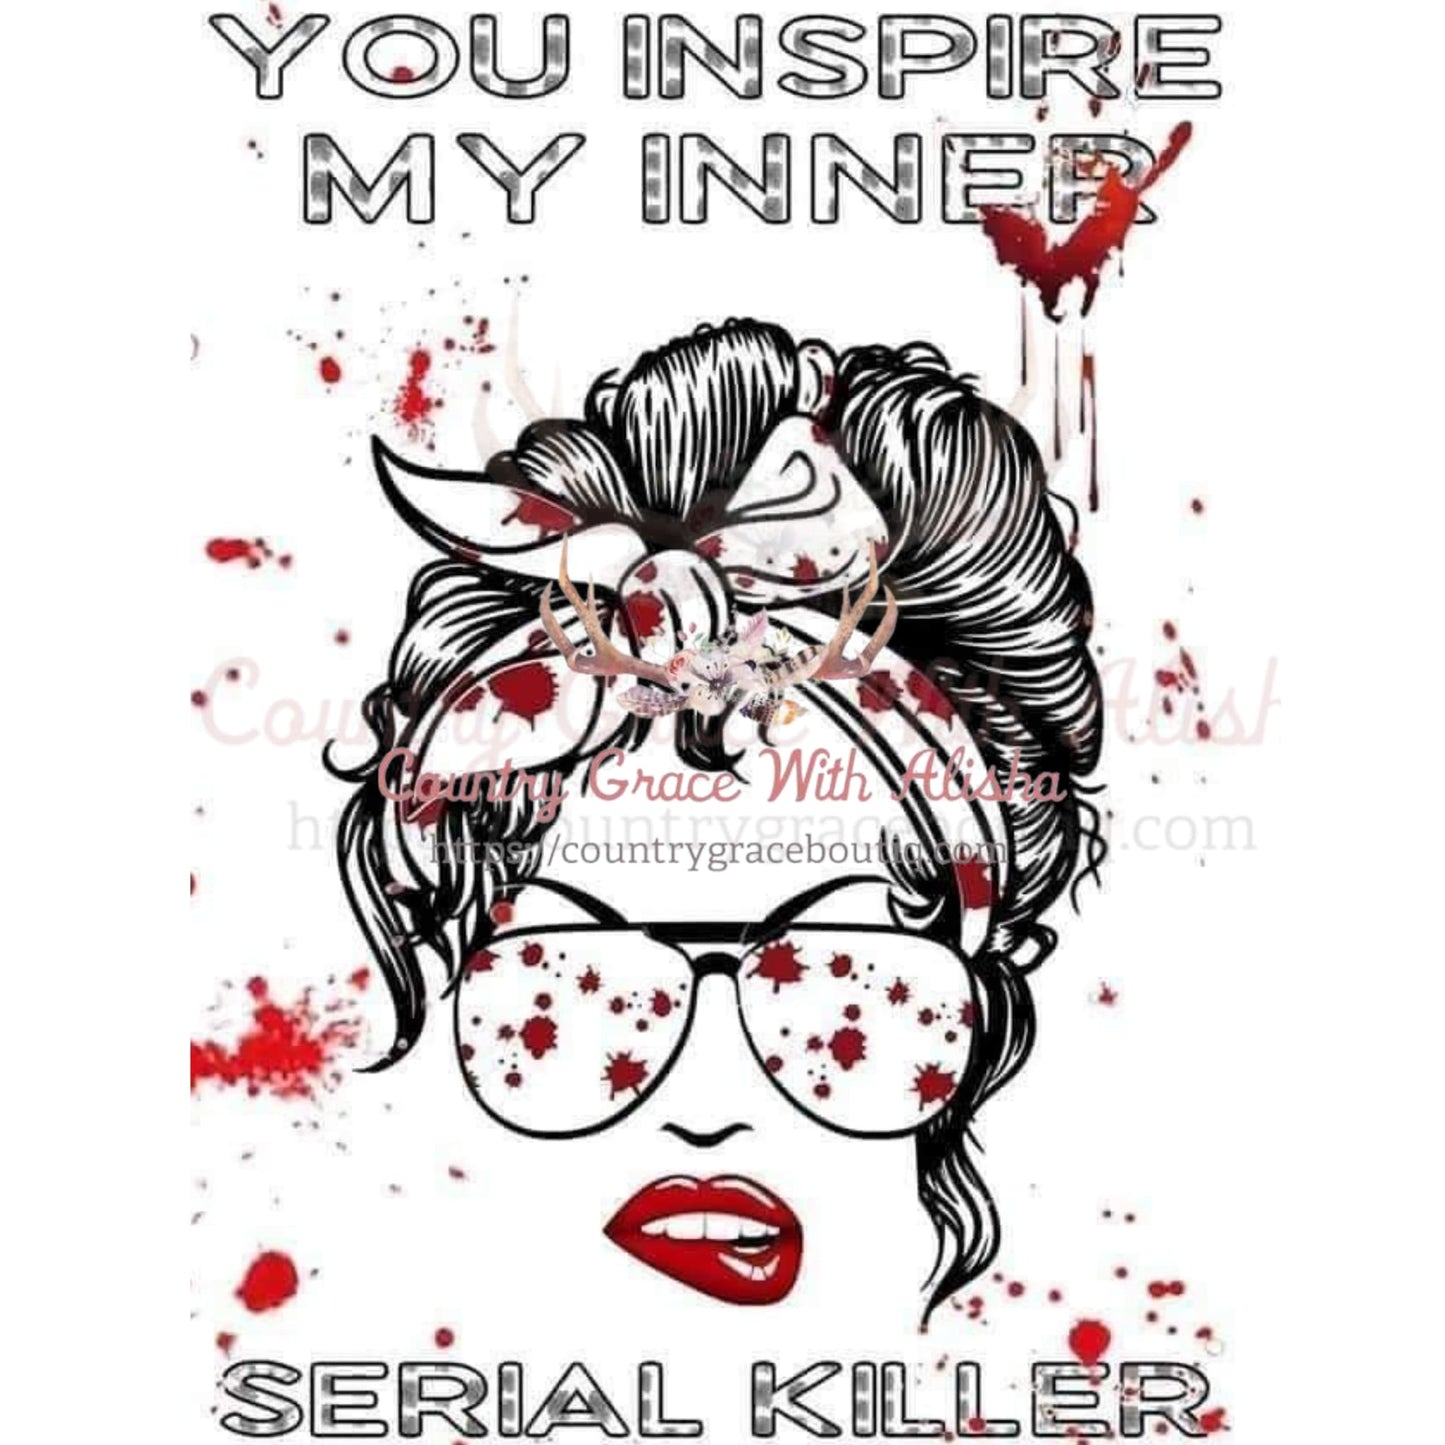 Serial Killer Sublimation Transfer - Sub $1.50 Country Grace